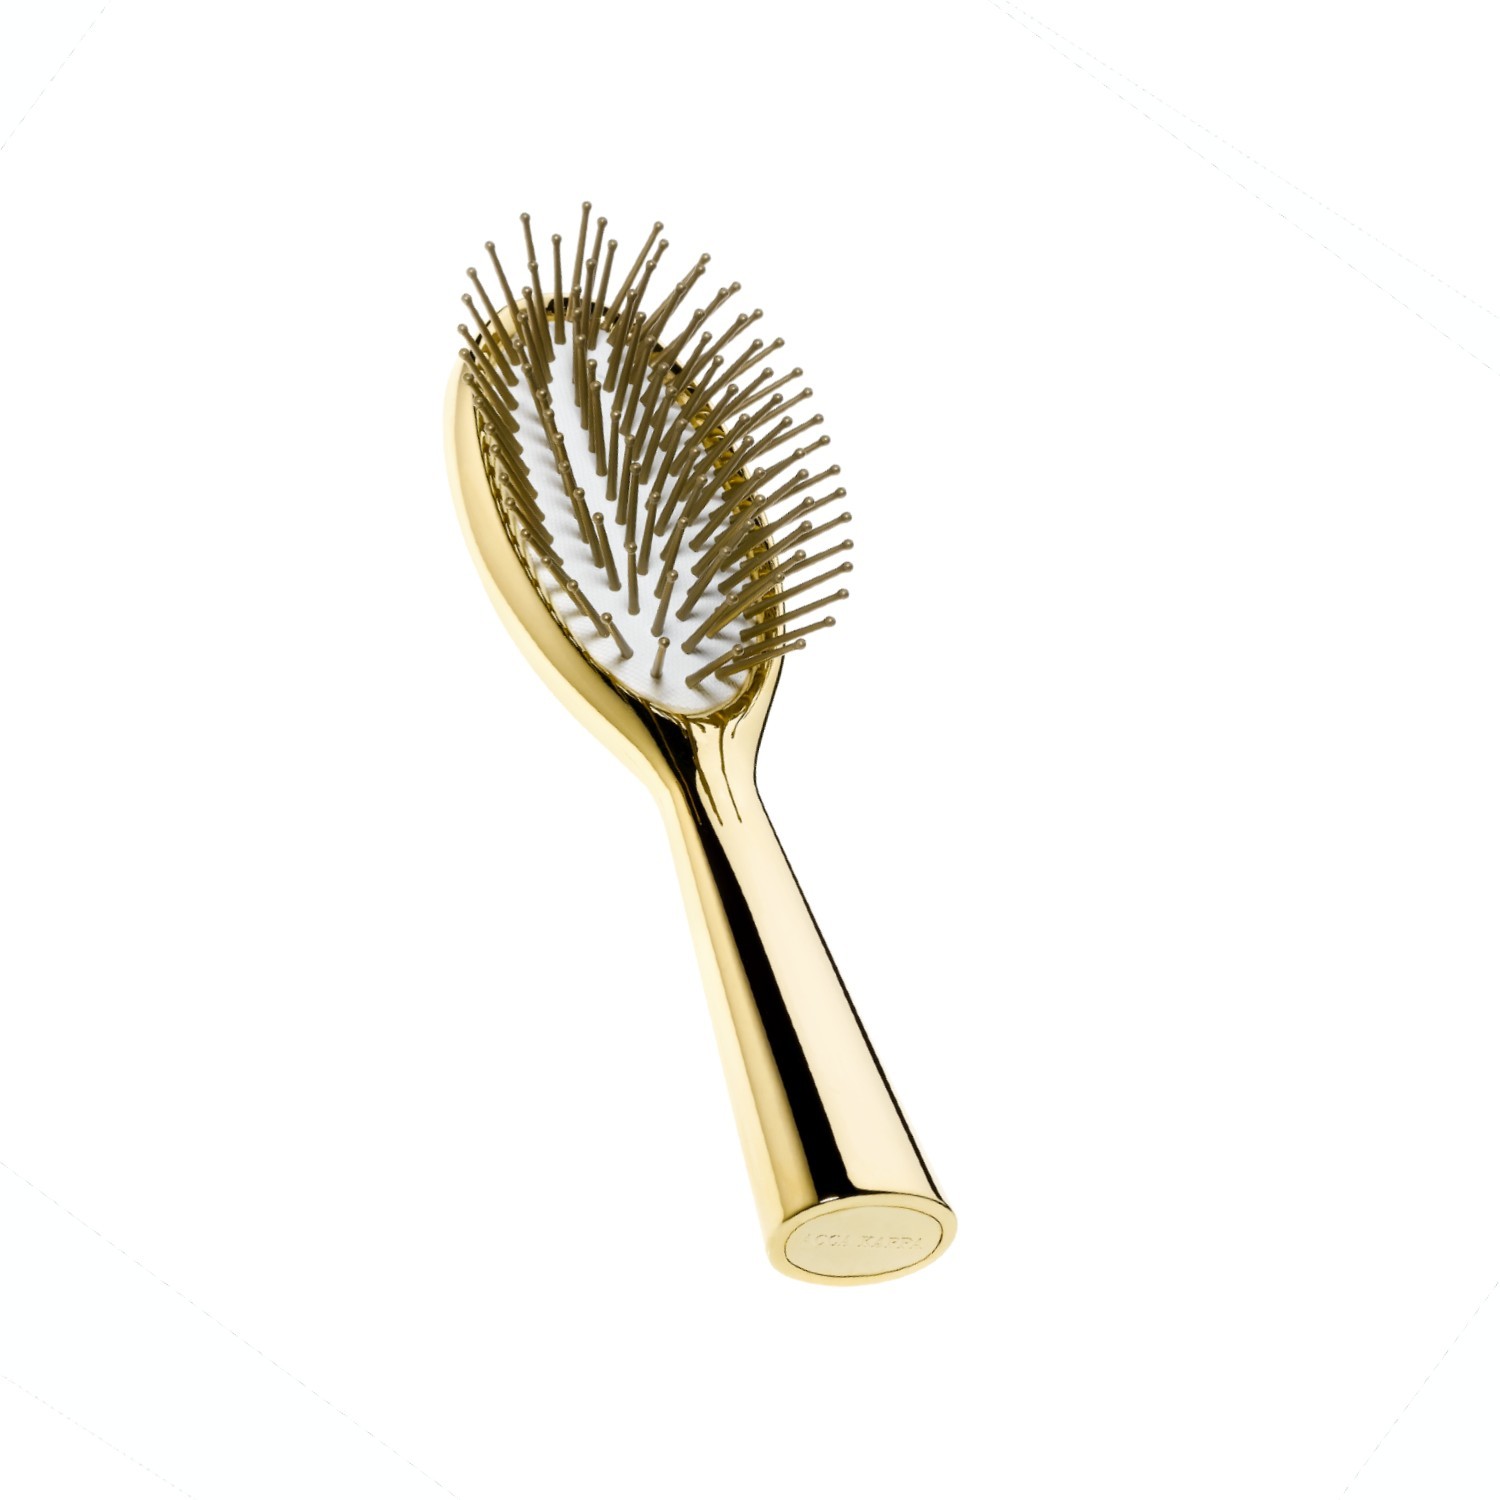 ACCA KAPPA Travel Gold Plated Hairbrush with Natural Rubber Cushion